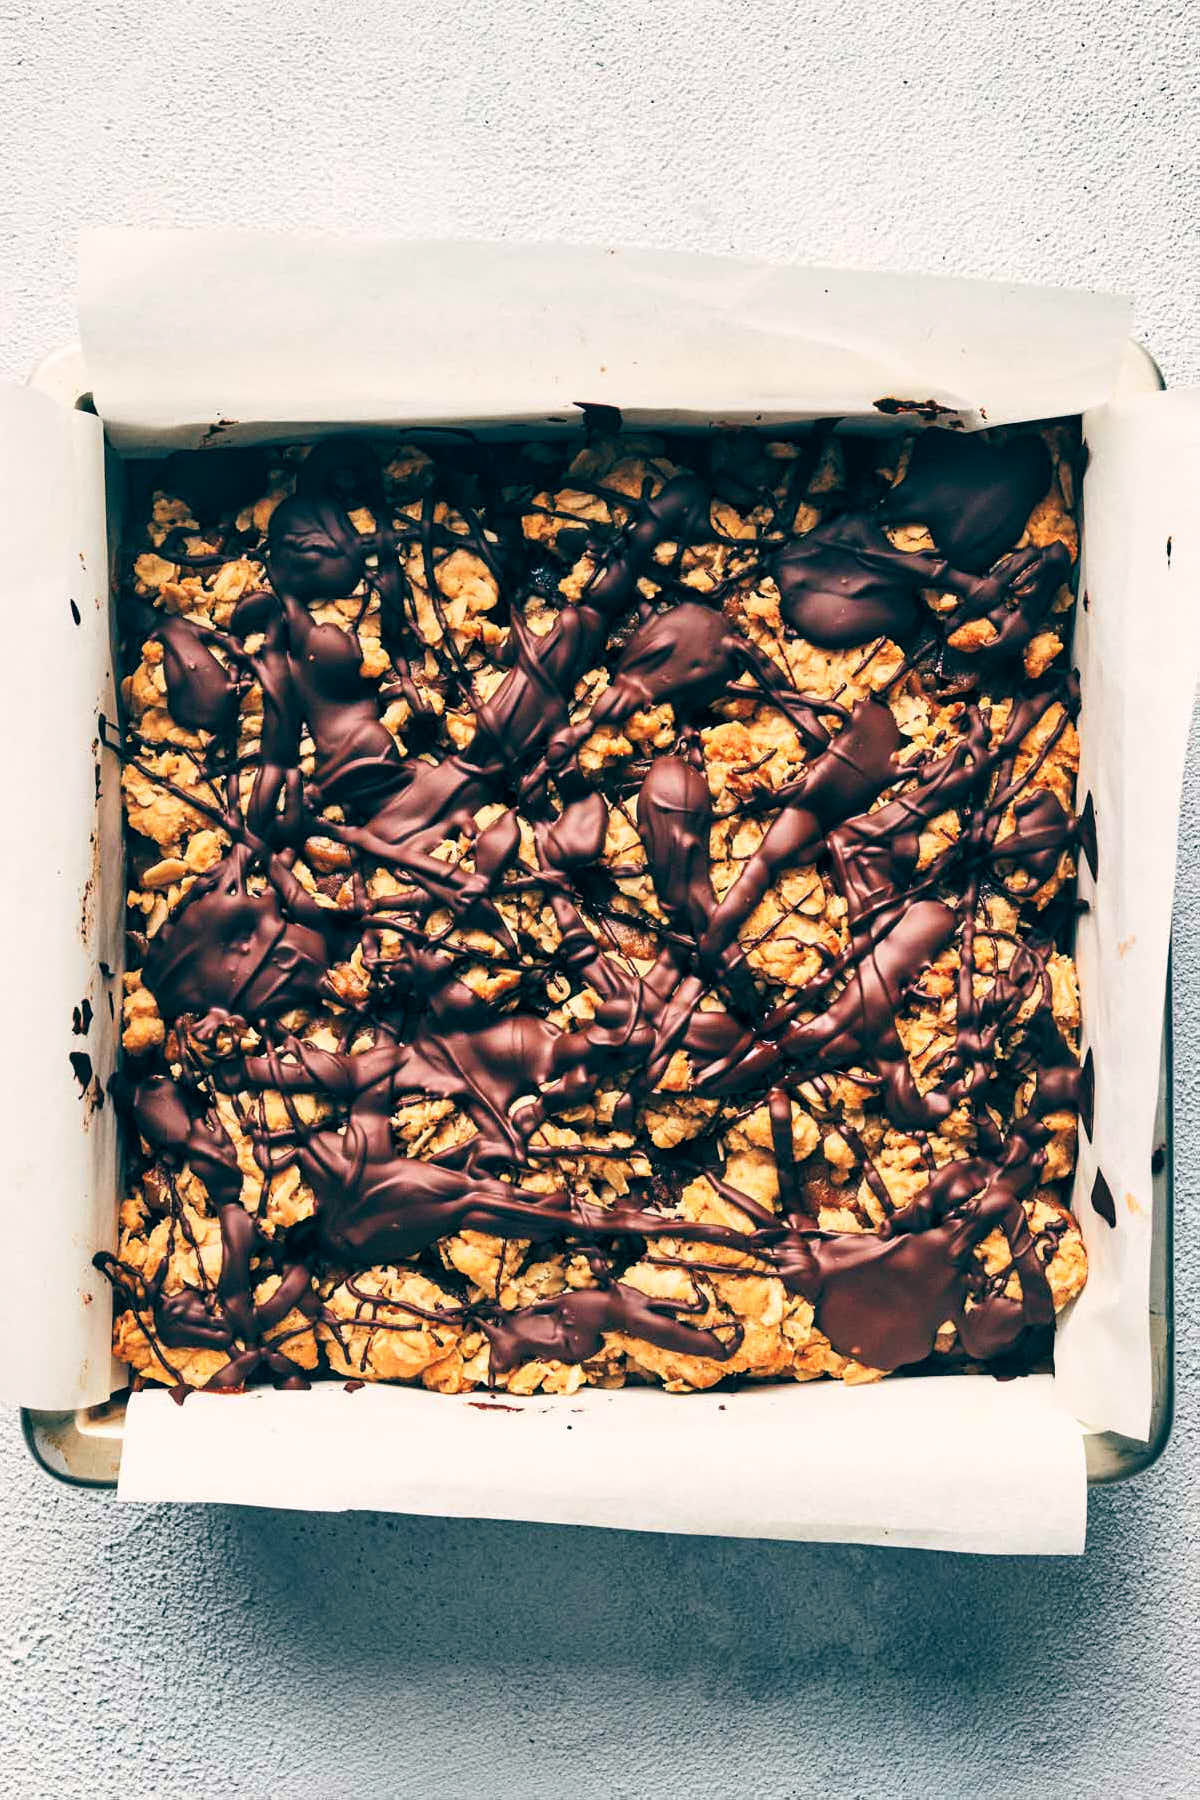 Caramelitas fully layered into baking pan with melted chocolate on top